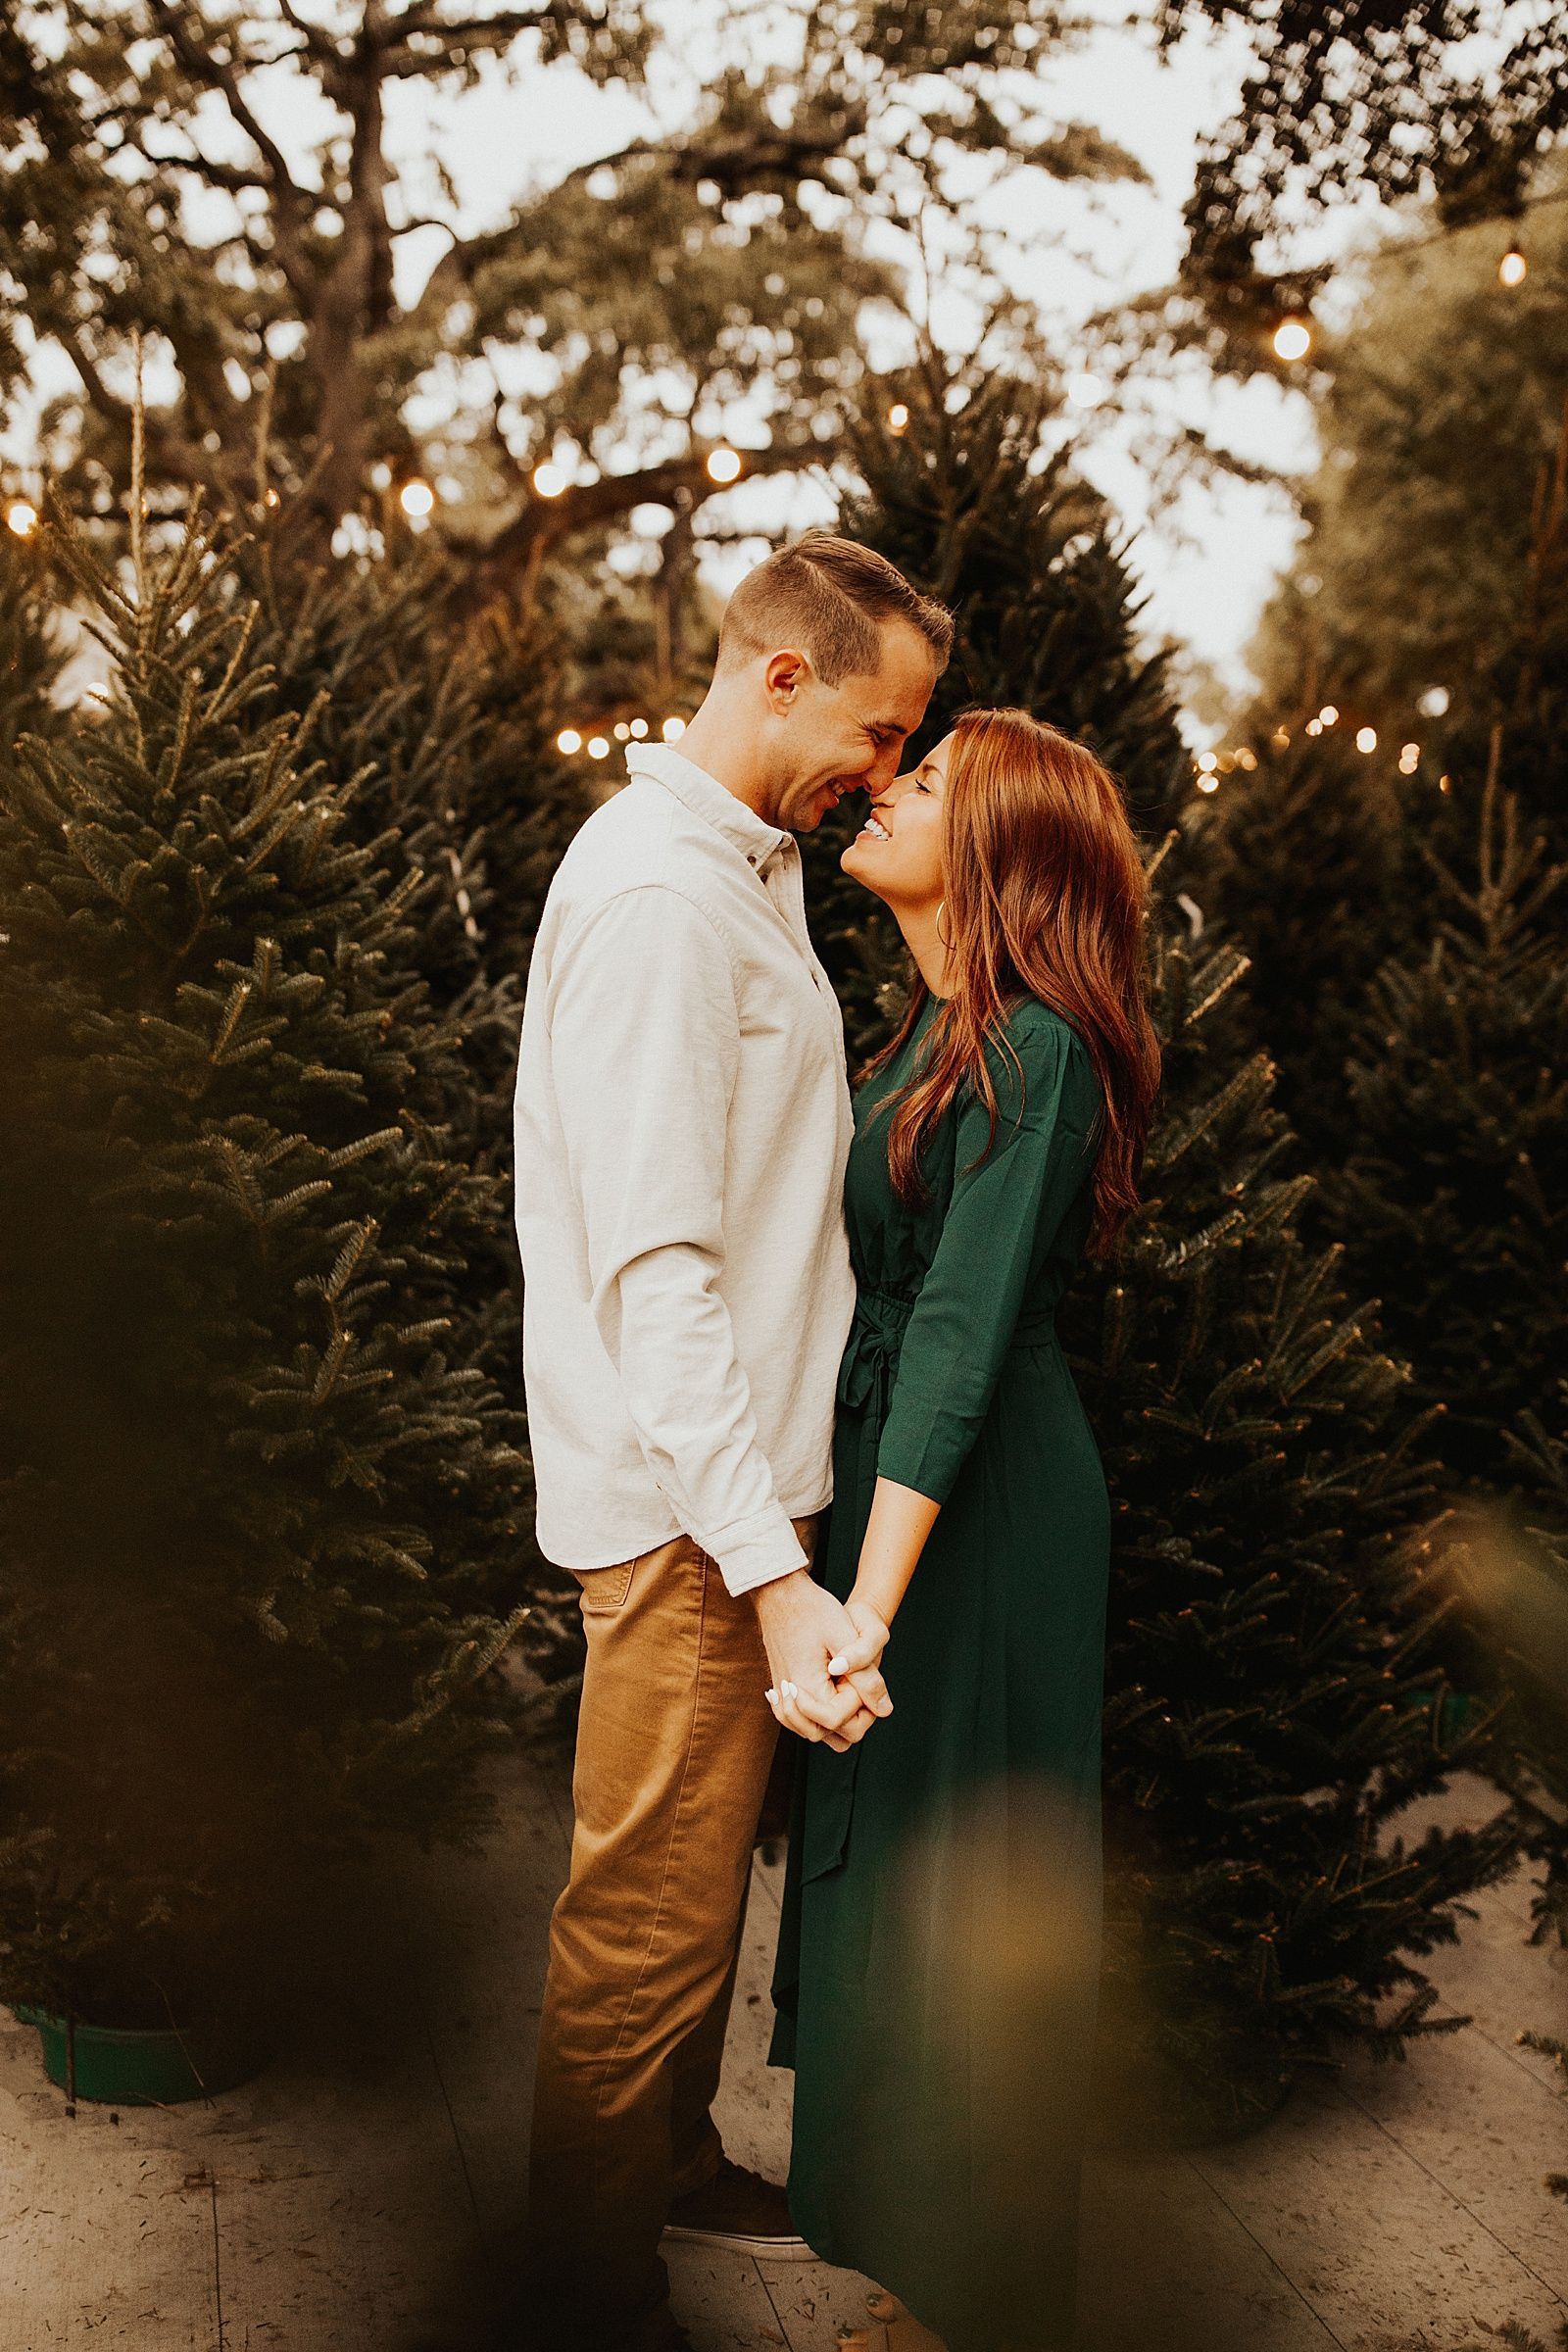 Cozy and Romantic Christmas Engagement Photos in Austin, TX -   18 christmas photoshoot couples ideas